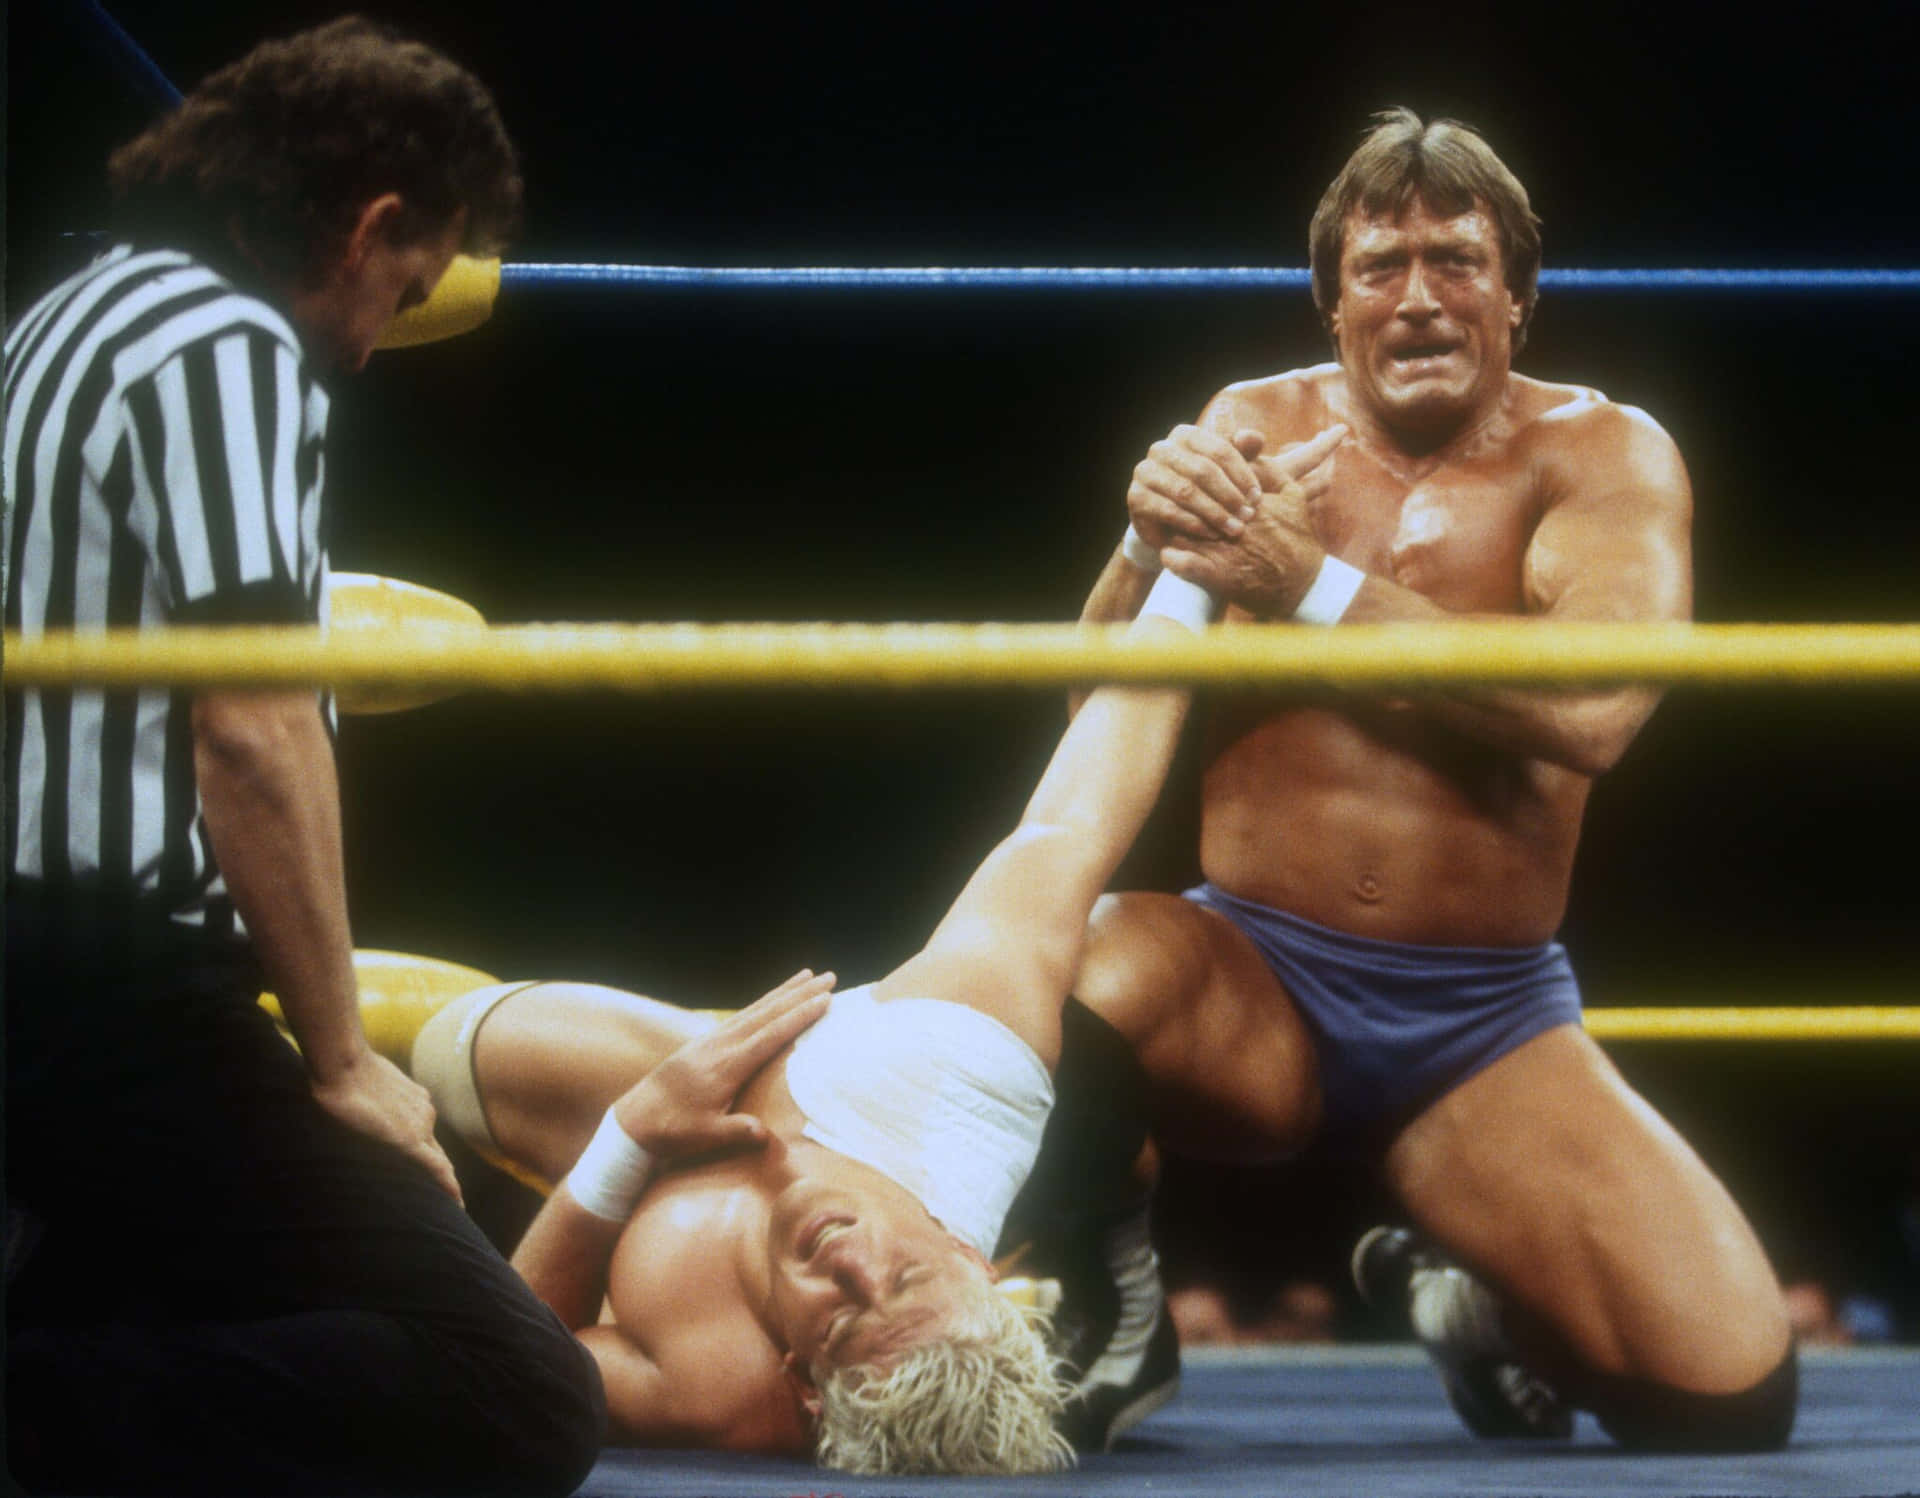 WWE Hall of Fame, memorable match between Paul Orndorff and Dustin Rhodes, 1995. Wallpaper